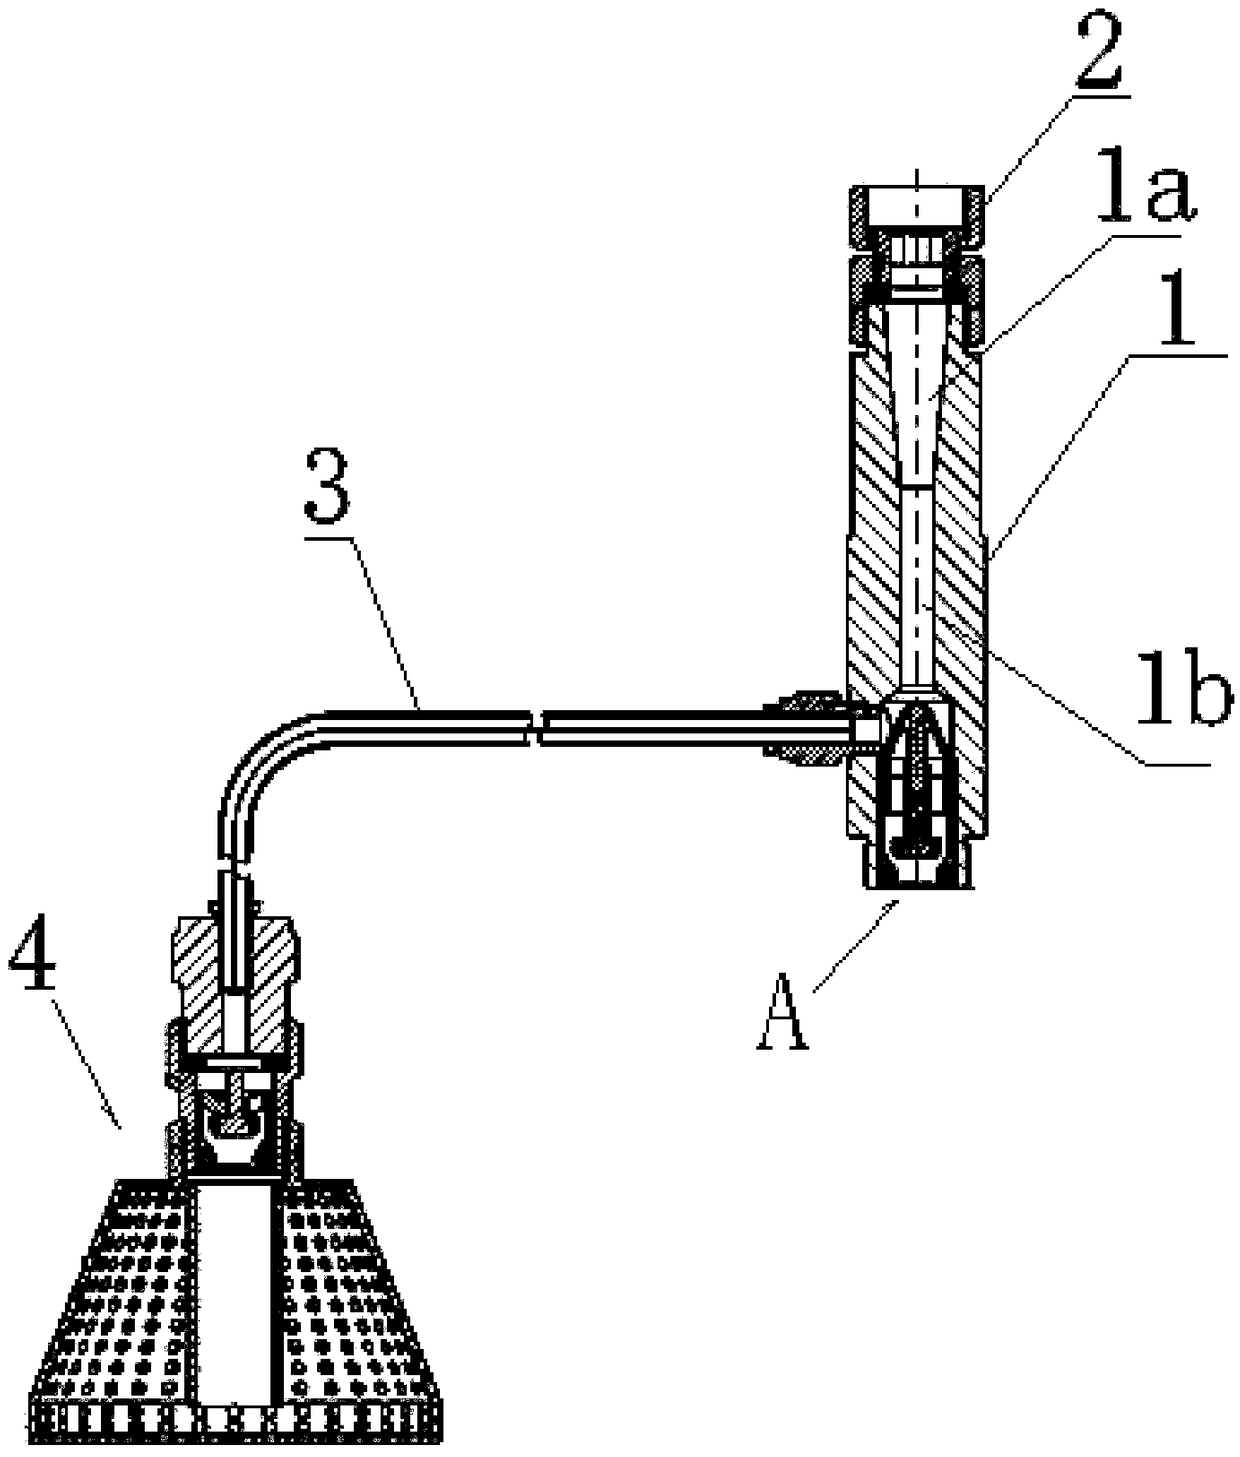 Anti-clogging jet pump and anti-clogging method for reclaiming and reusing reclaimed water resources